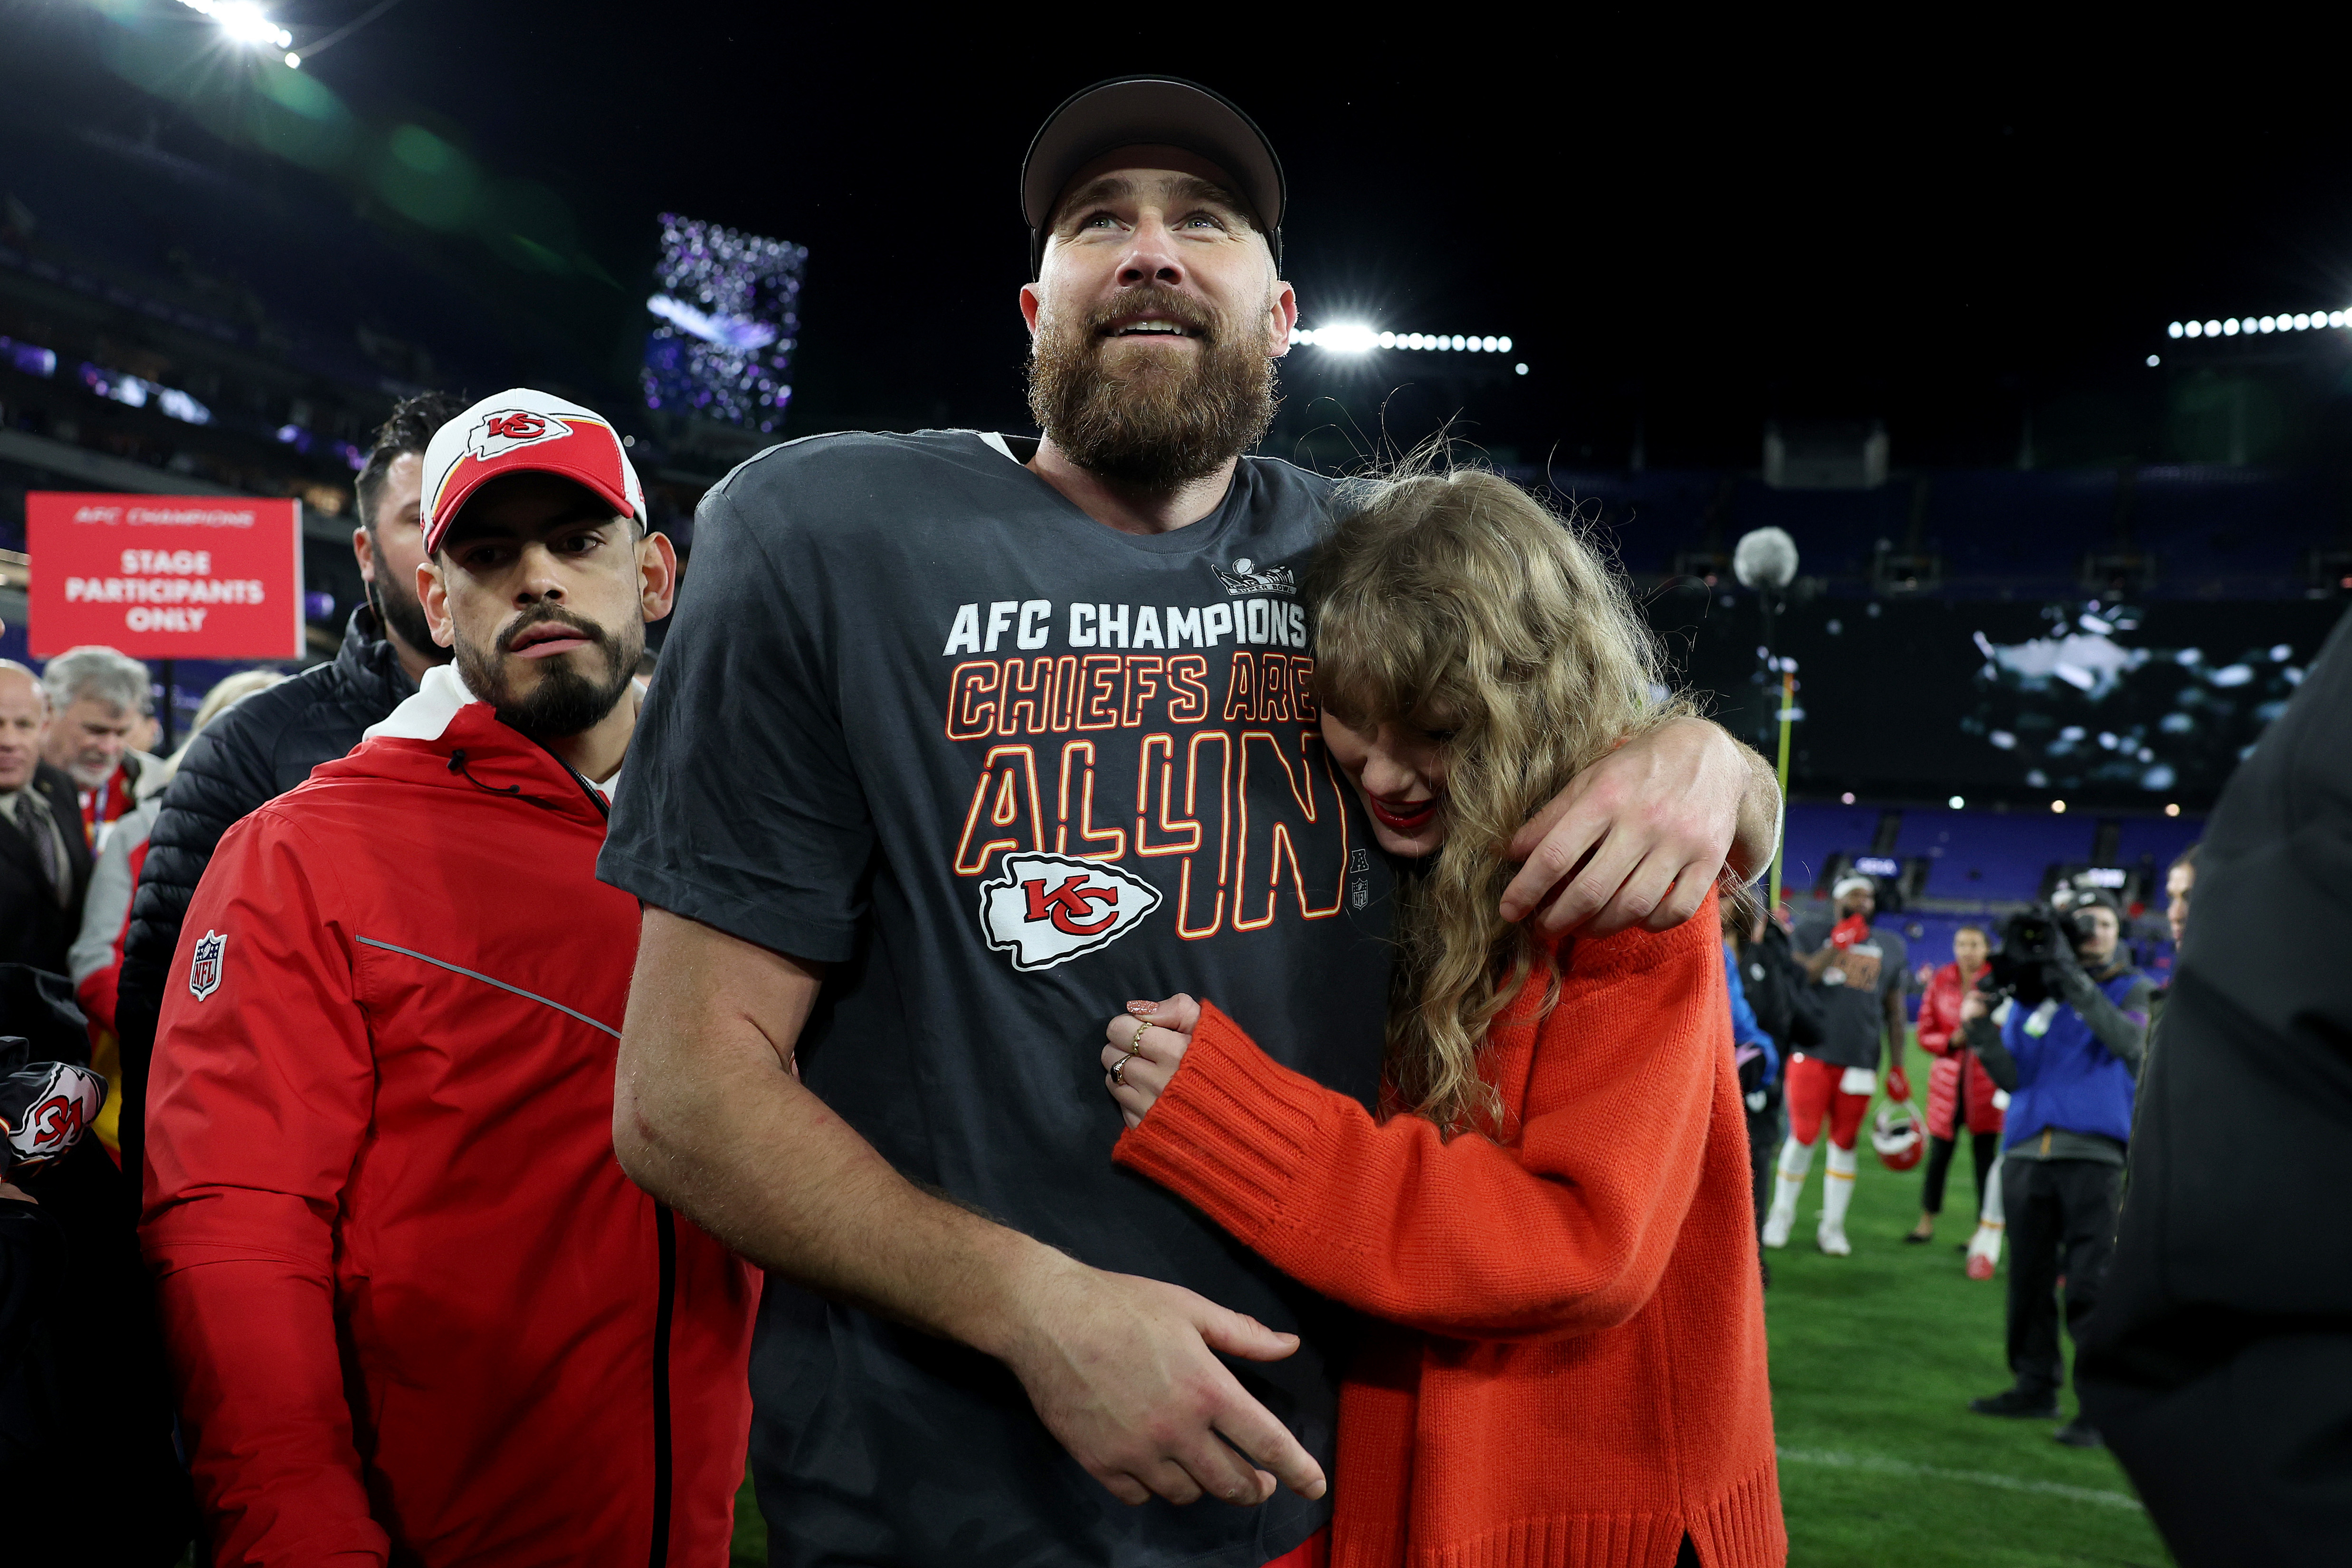 Travis Kelce, in casual sports clothing, embraces Taylor Swift, wearing a cardigan, on a football field. Another man in red sports gear stands near them